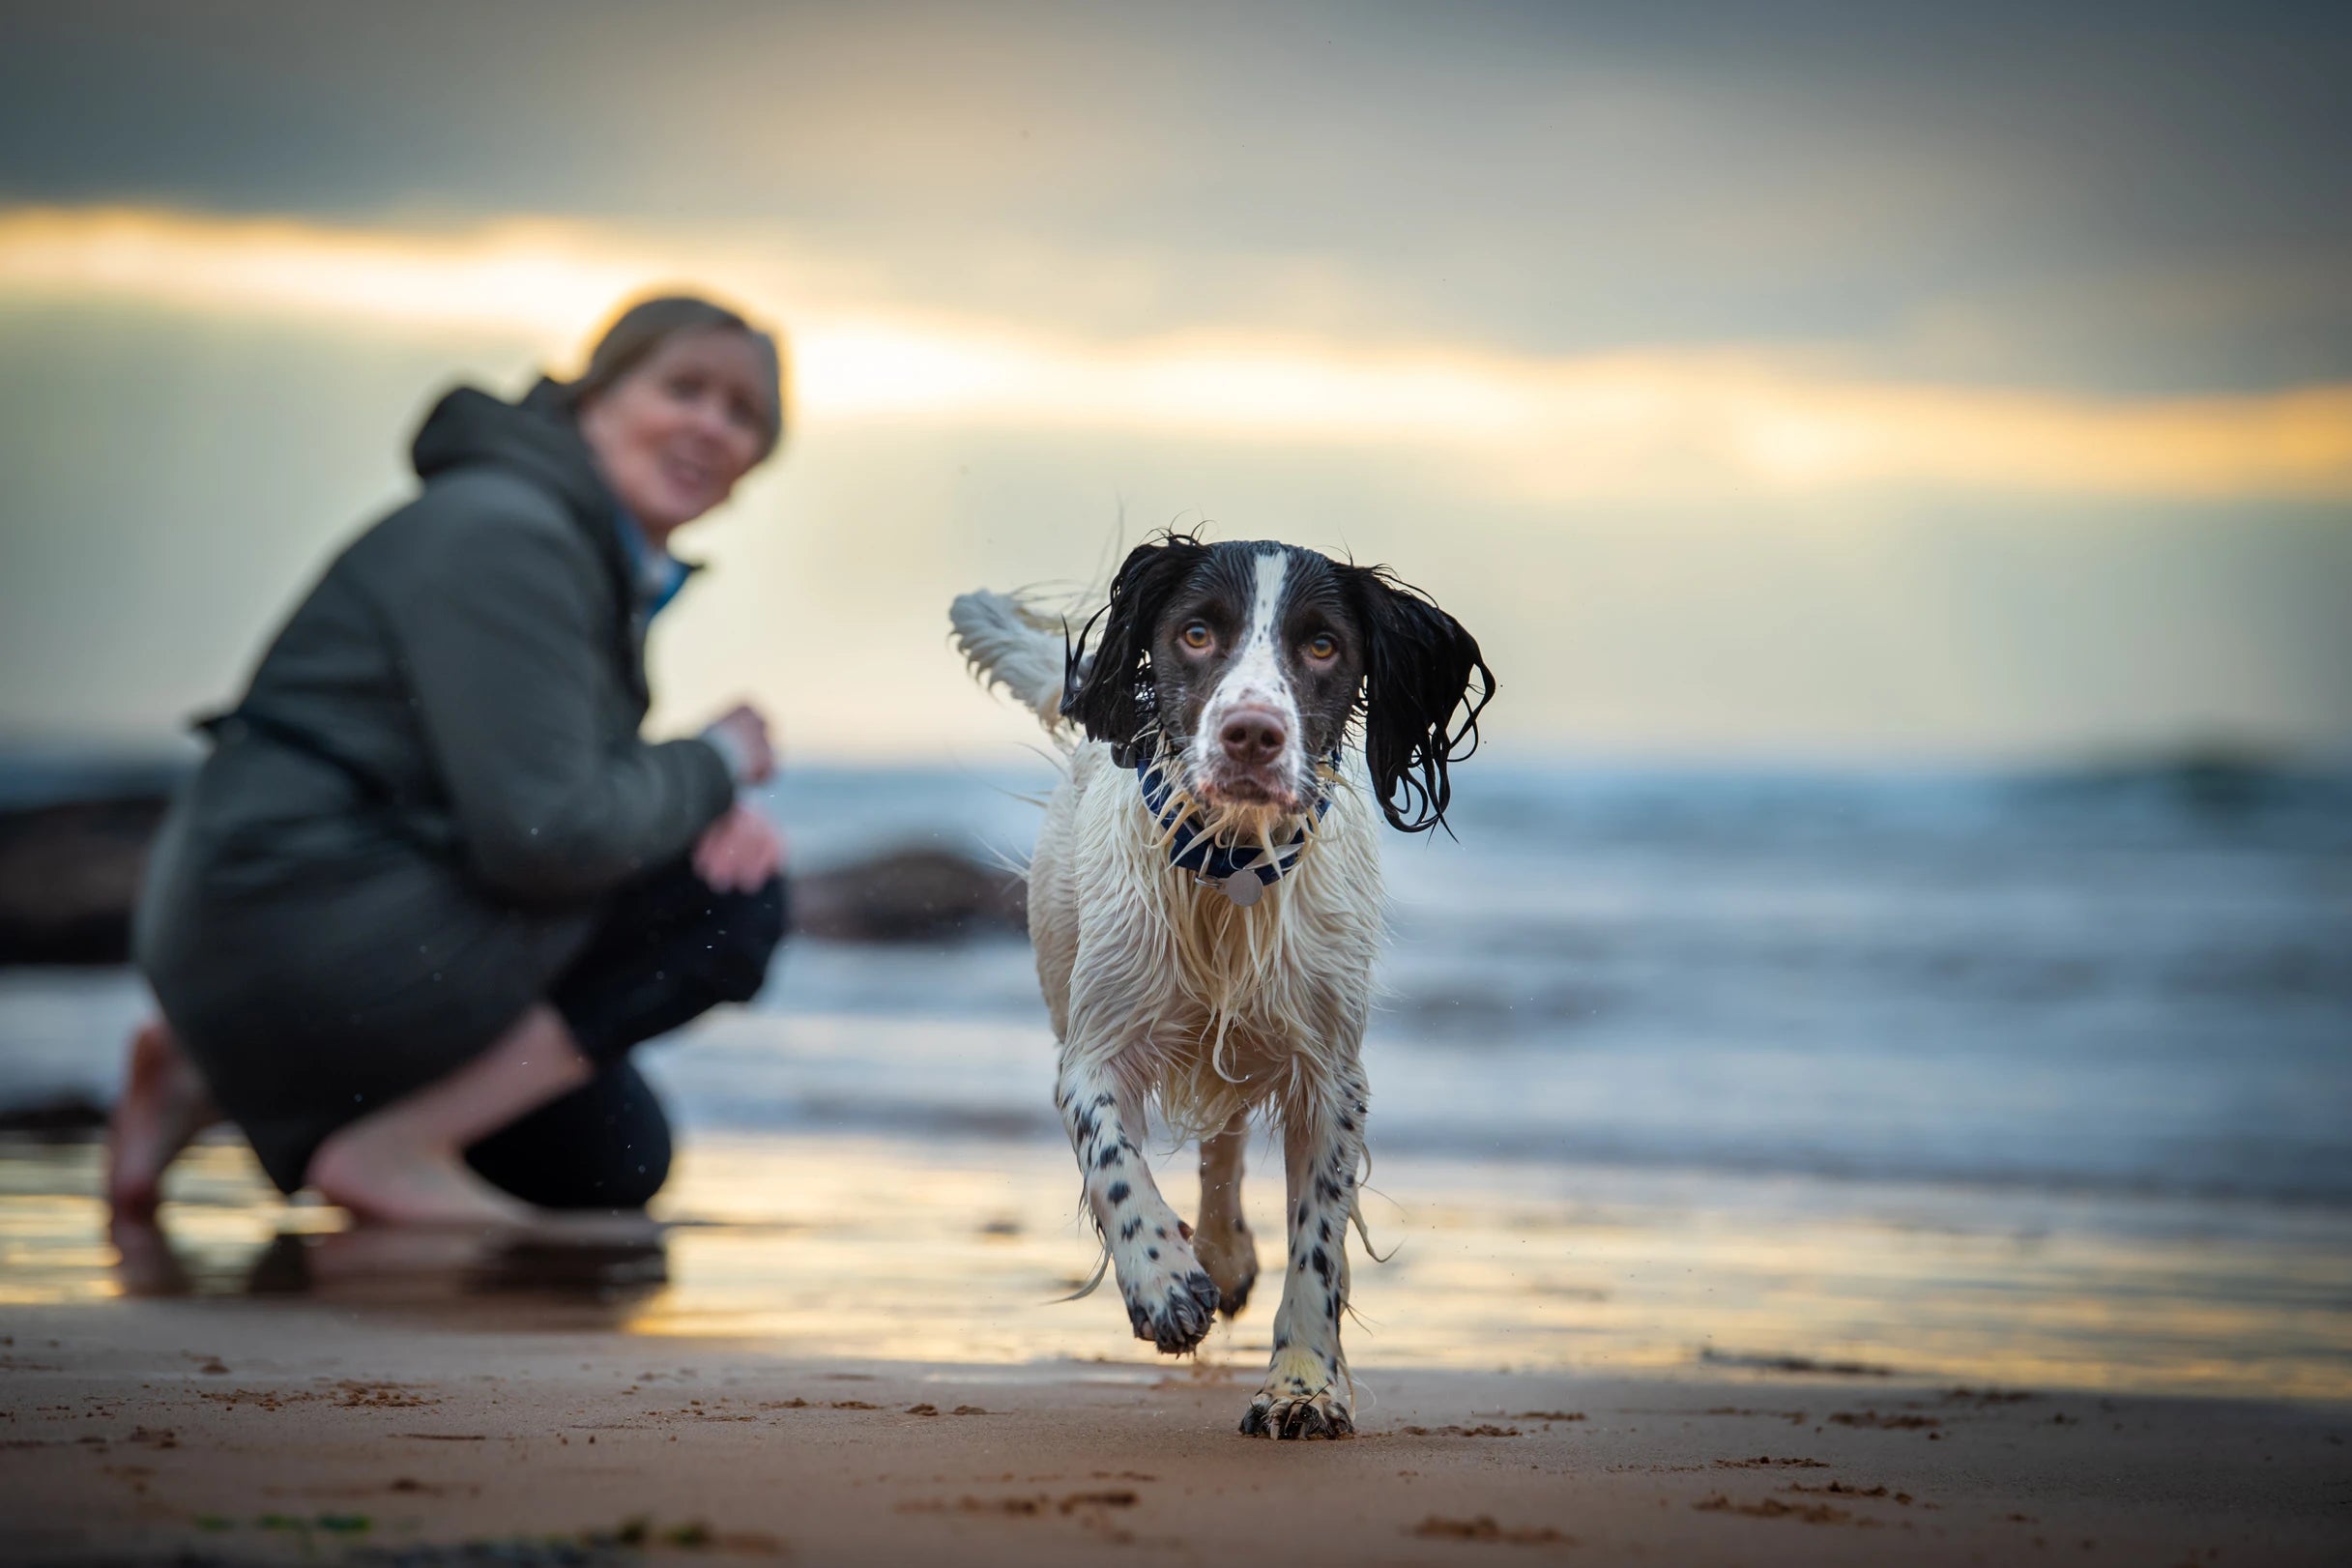 4 Things to consider before booking a photoshoot for your dog and top tips for success